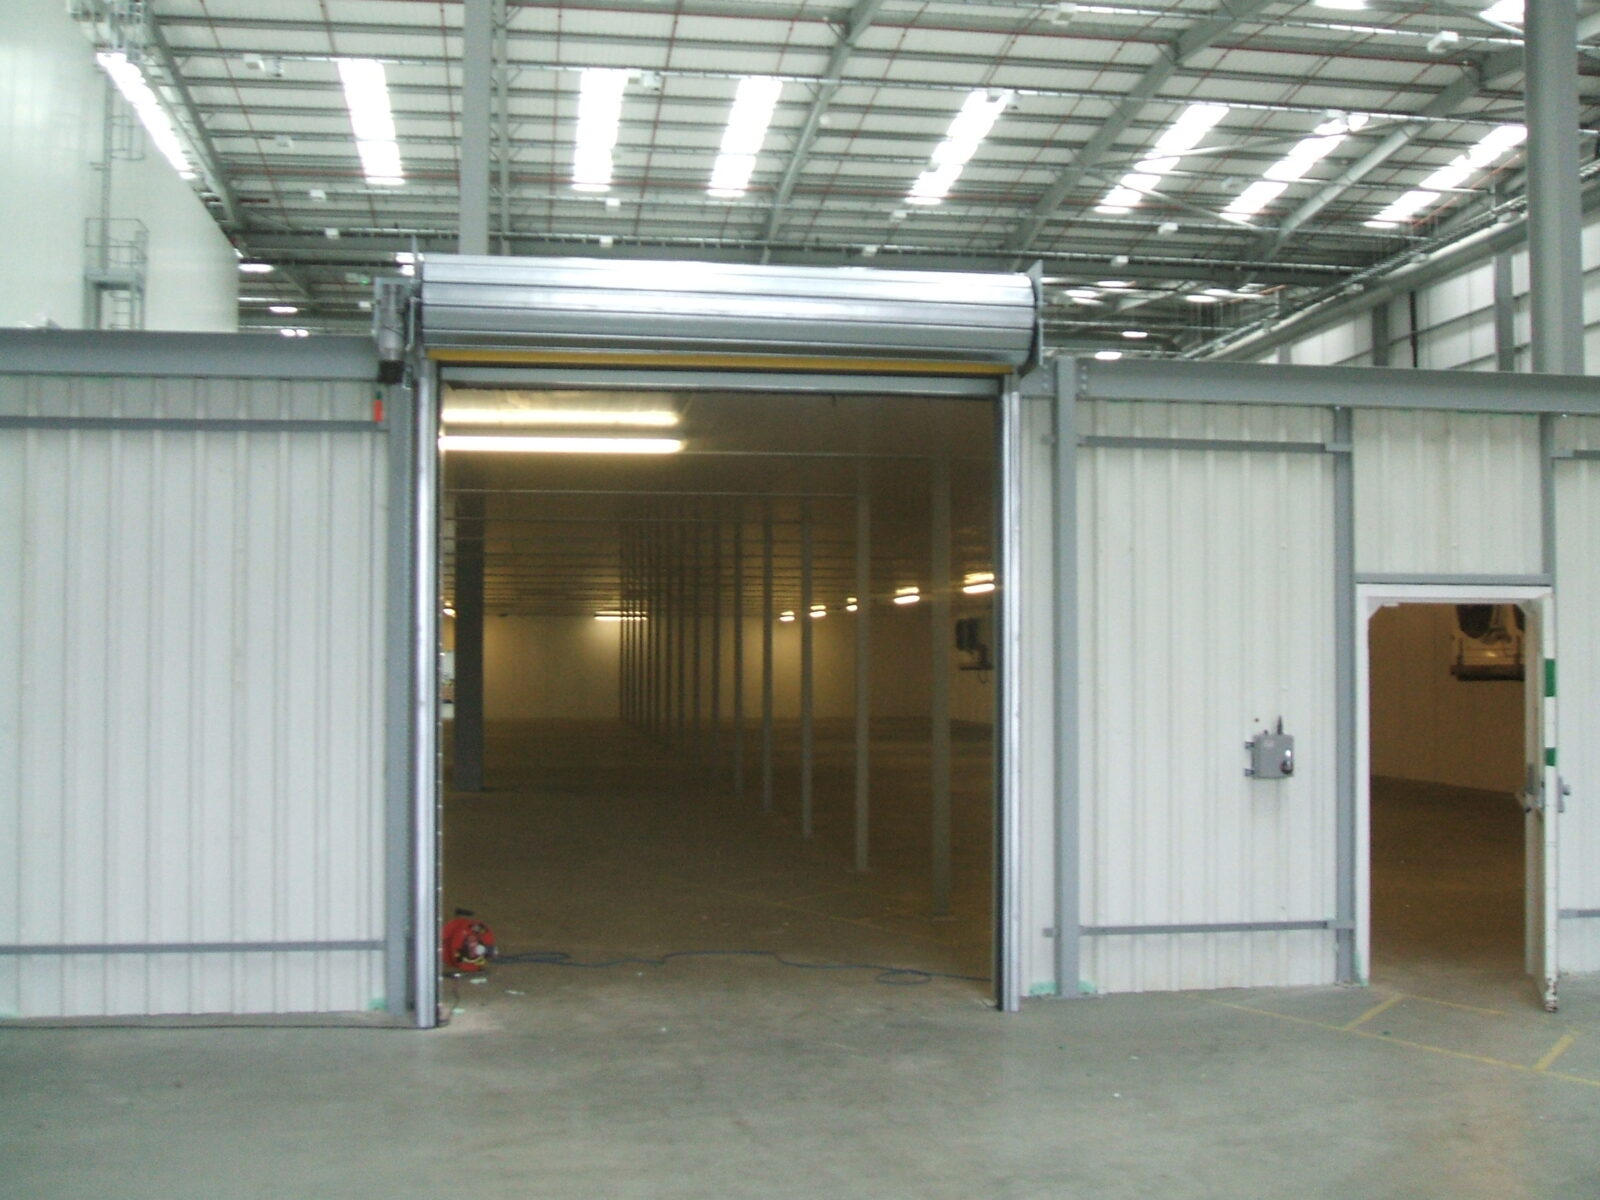 Temporary modular cold store hire. Modular steel coldstores can be fitted into most warehouse spaces.